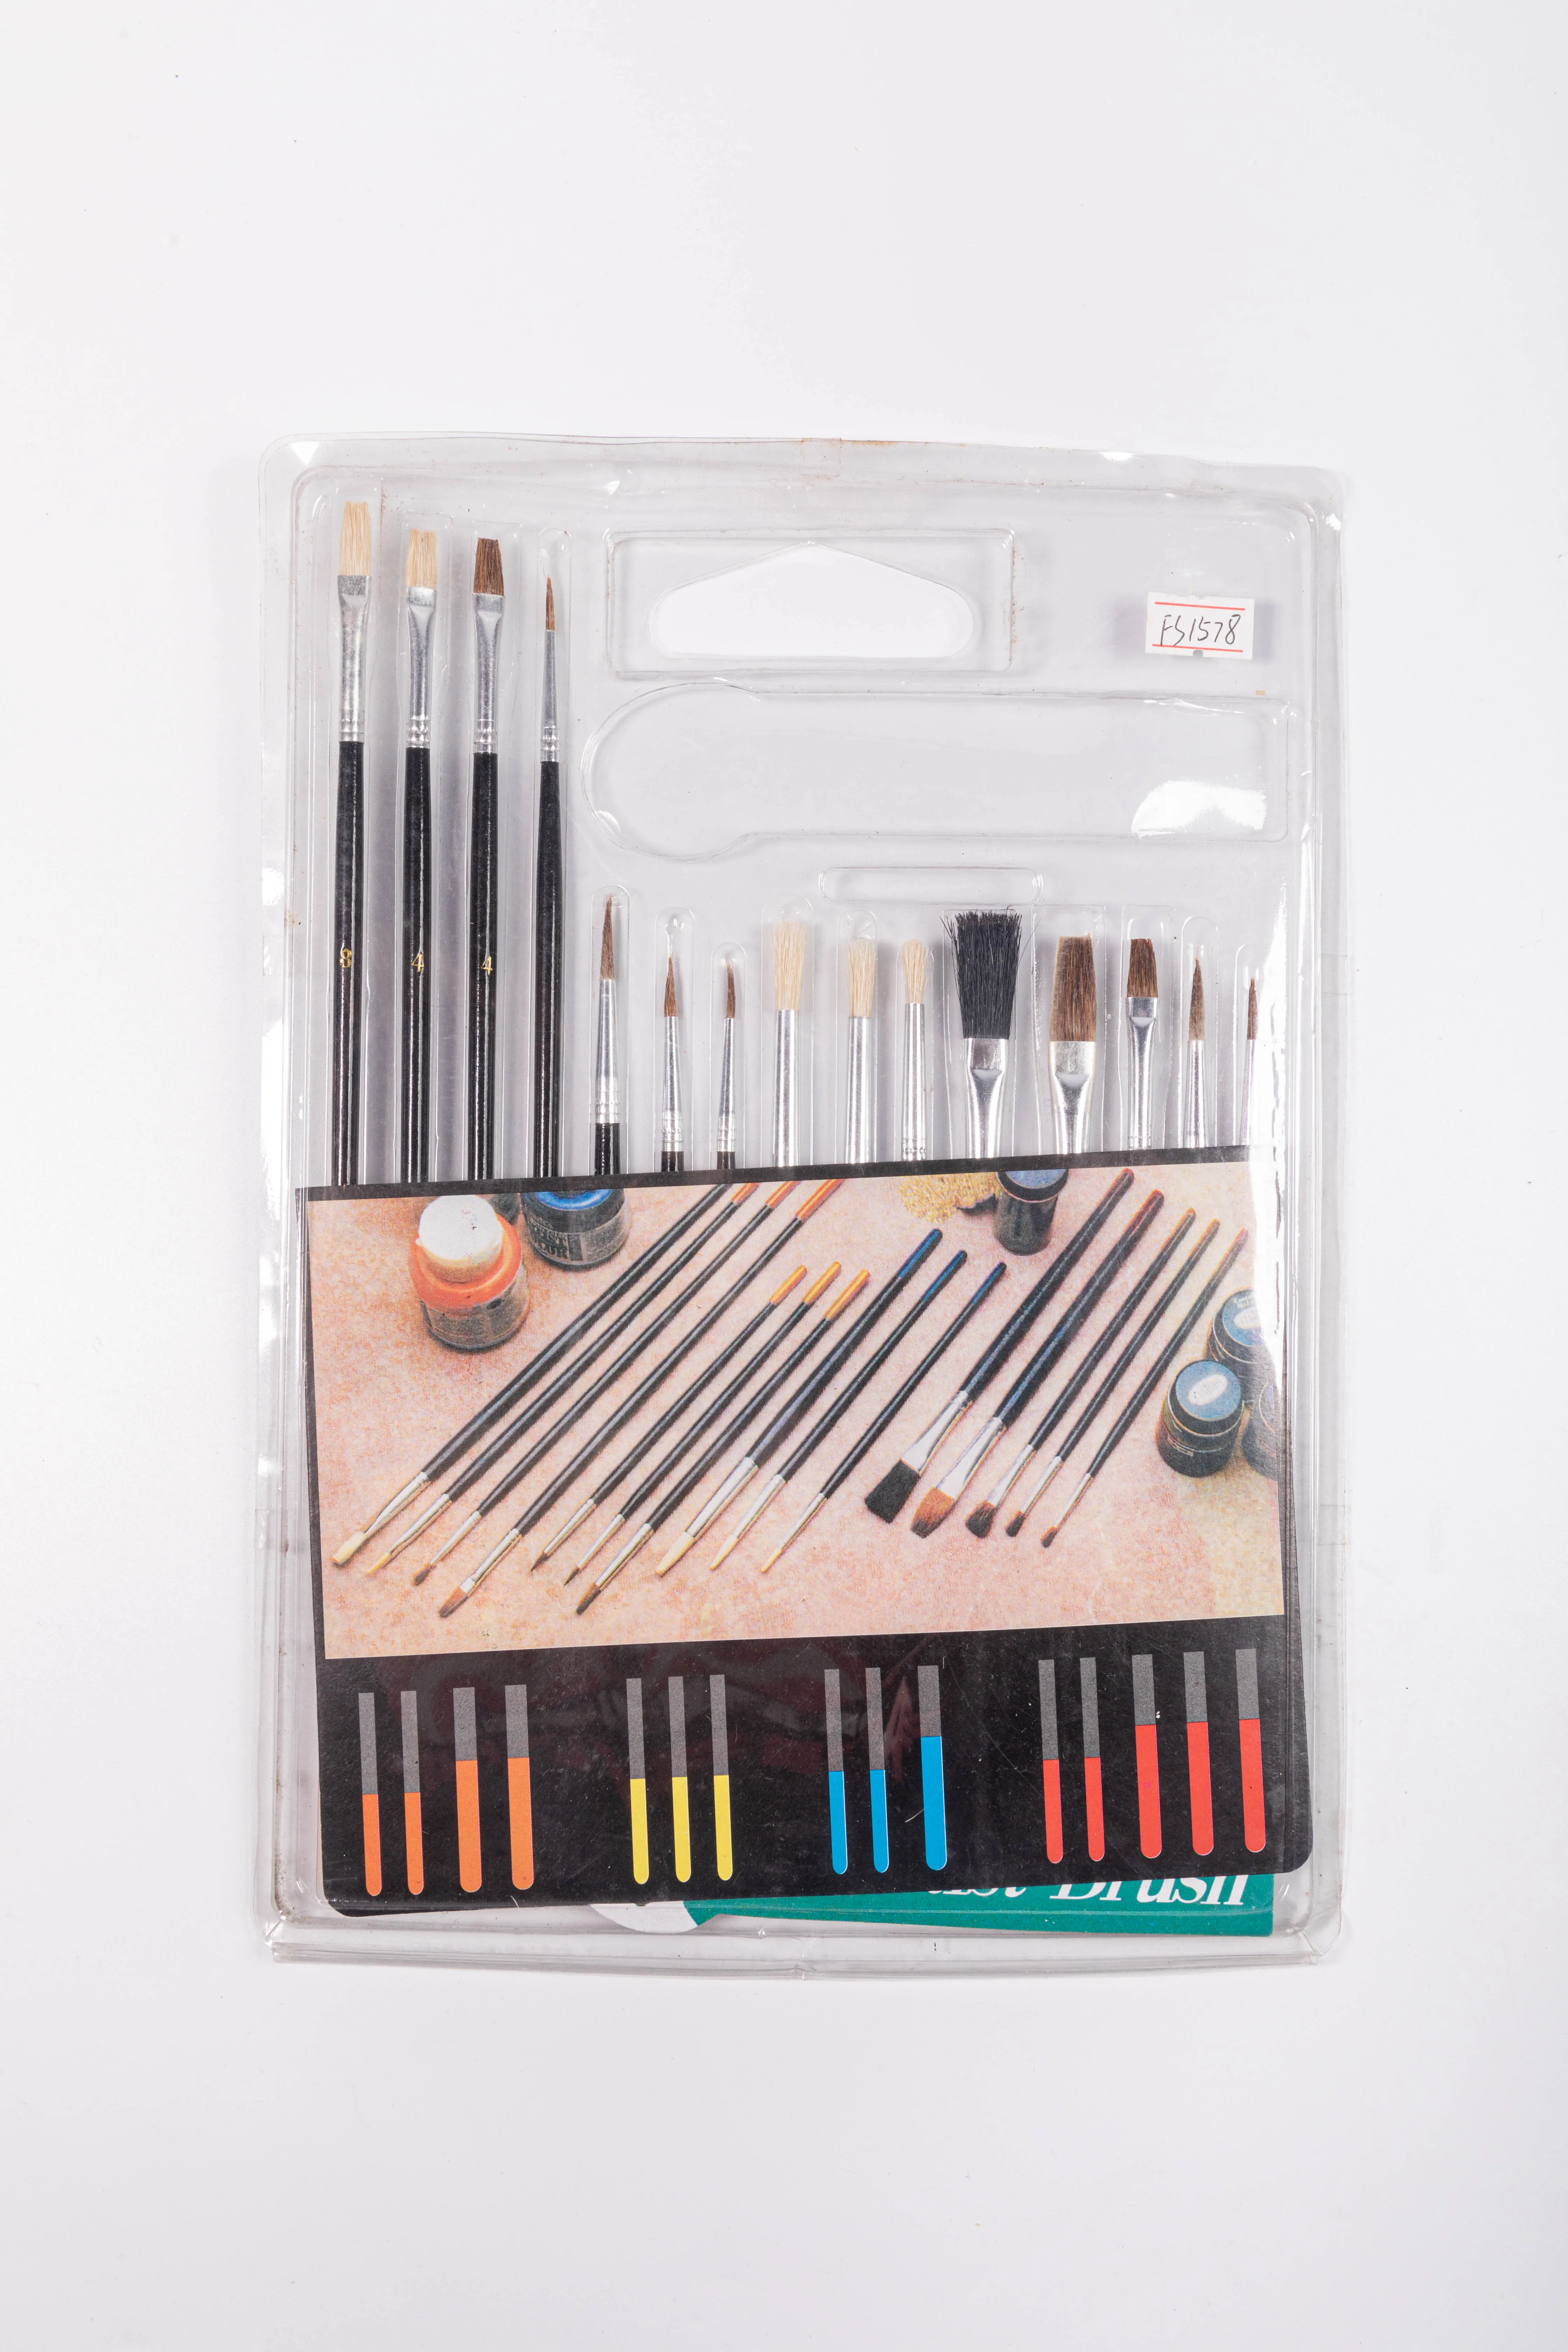 cheap quality painting tools school artist wooden professional paint art brushes for art painting set